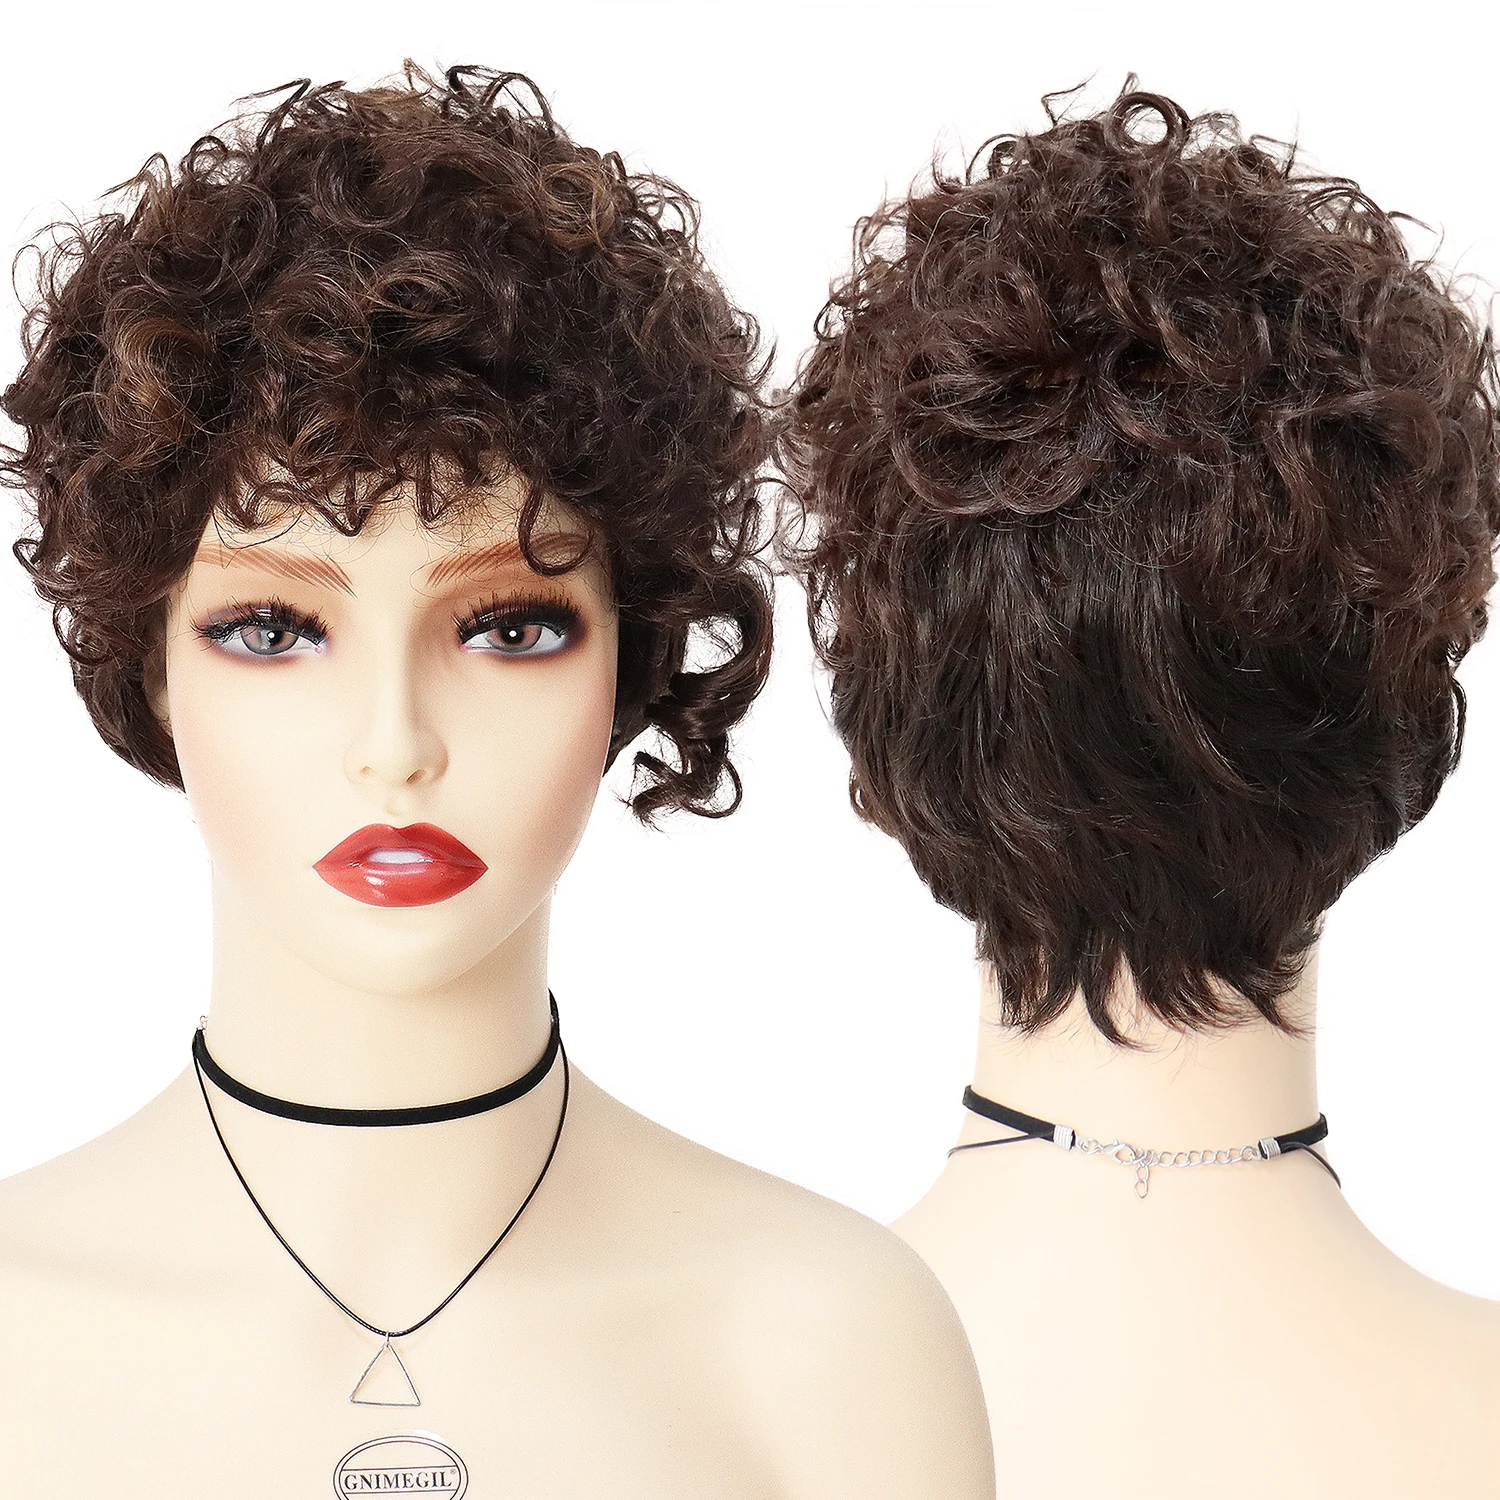 

GNIMEGIL Synthetic Hair Short Afro Kinky Curly Wigs for Black Women Colly Curls Ladies Wig with Bangs African American Wig Price